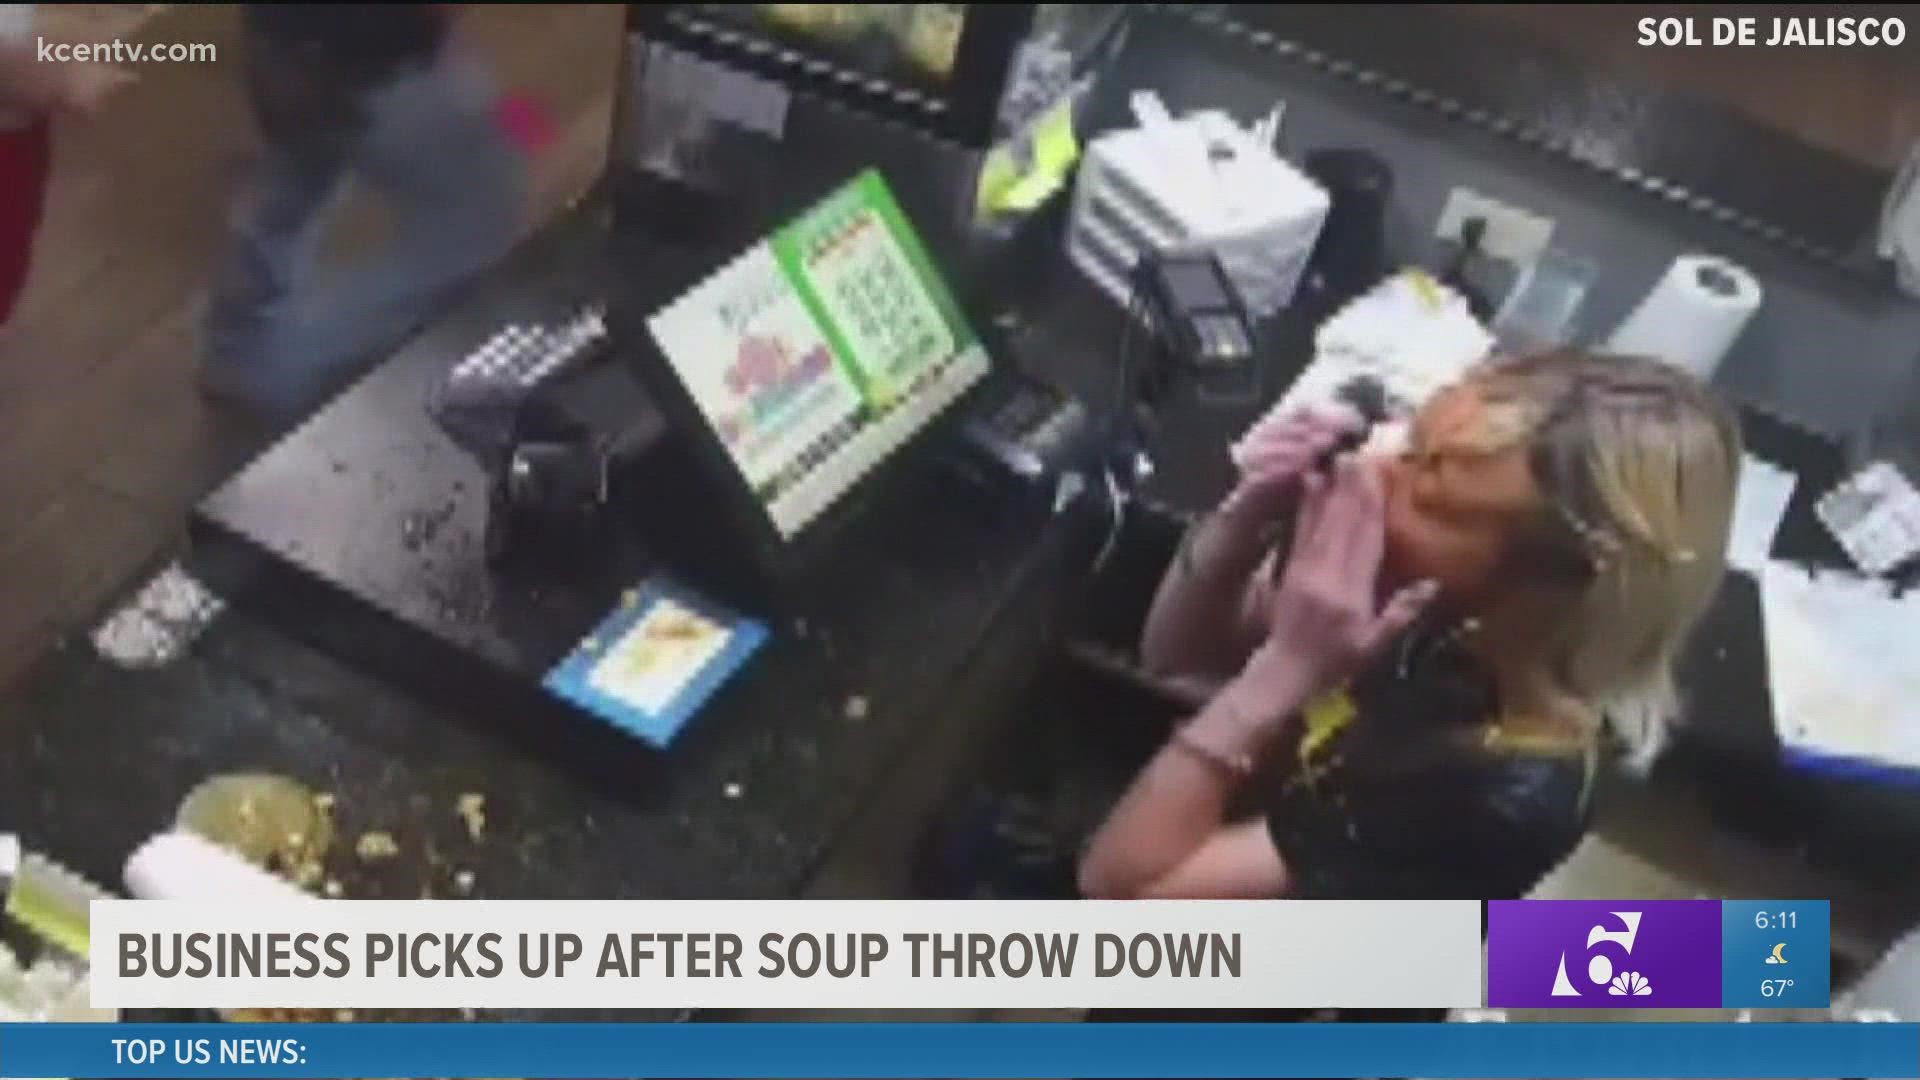 After a viral video put a Temple, TX restaurant on the map, the business is starting to catch up after the soup fiasco.